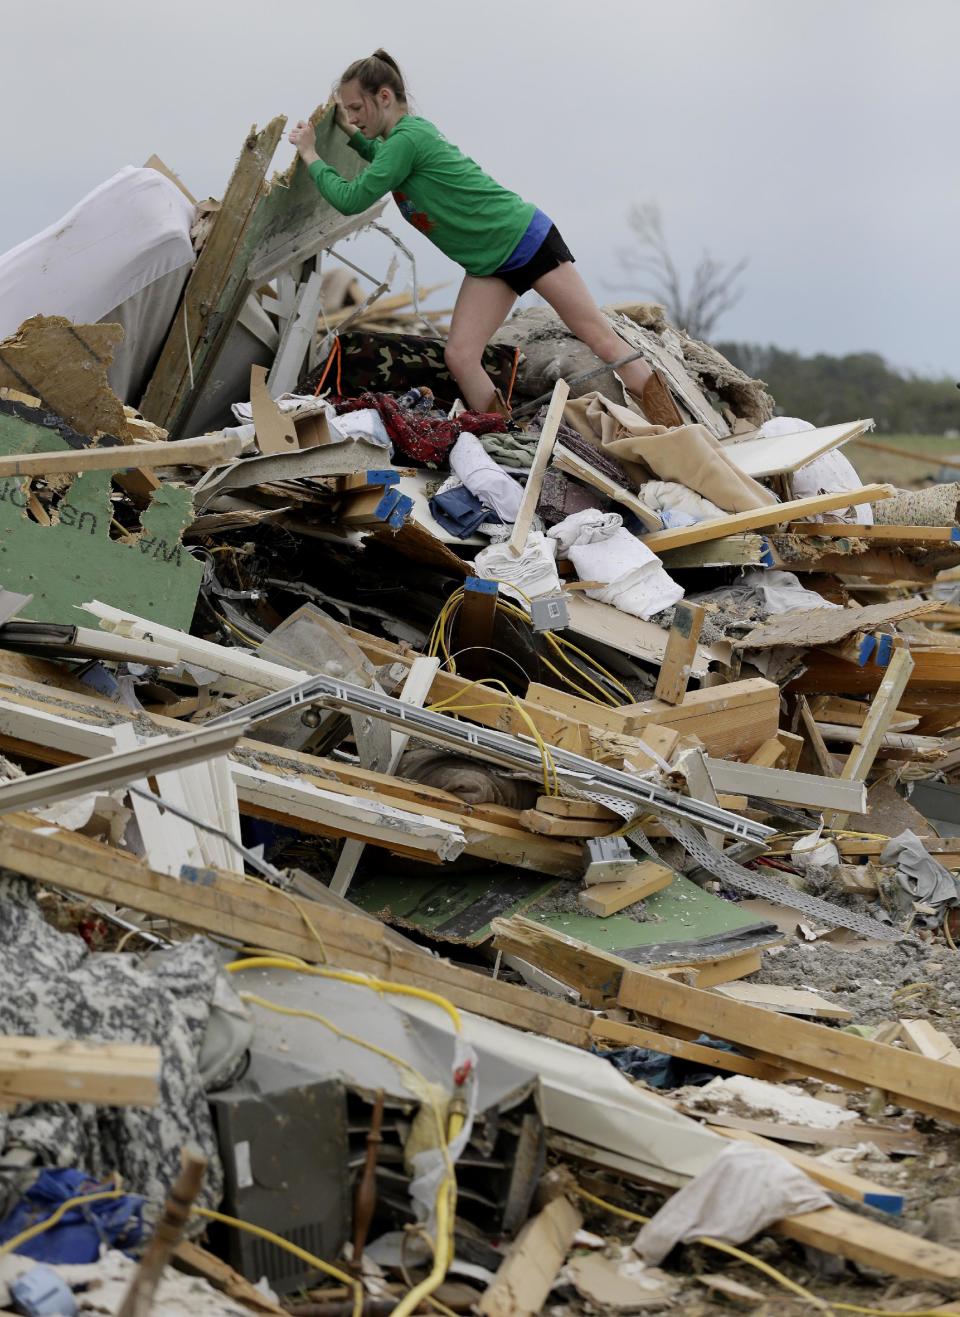 Callie Moore looks through the debris of her home that was destroyed by Sunday's tornado, Tuesday, April 29, 2014, in Vilonia, Ark. A dangerous storm system spawned a chain of deadly tornadoes over three days. (AP Photo/Eric Gay)